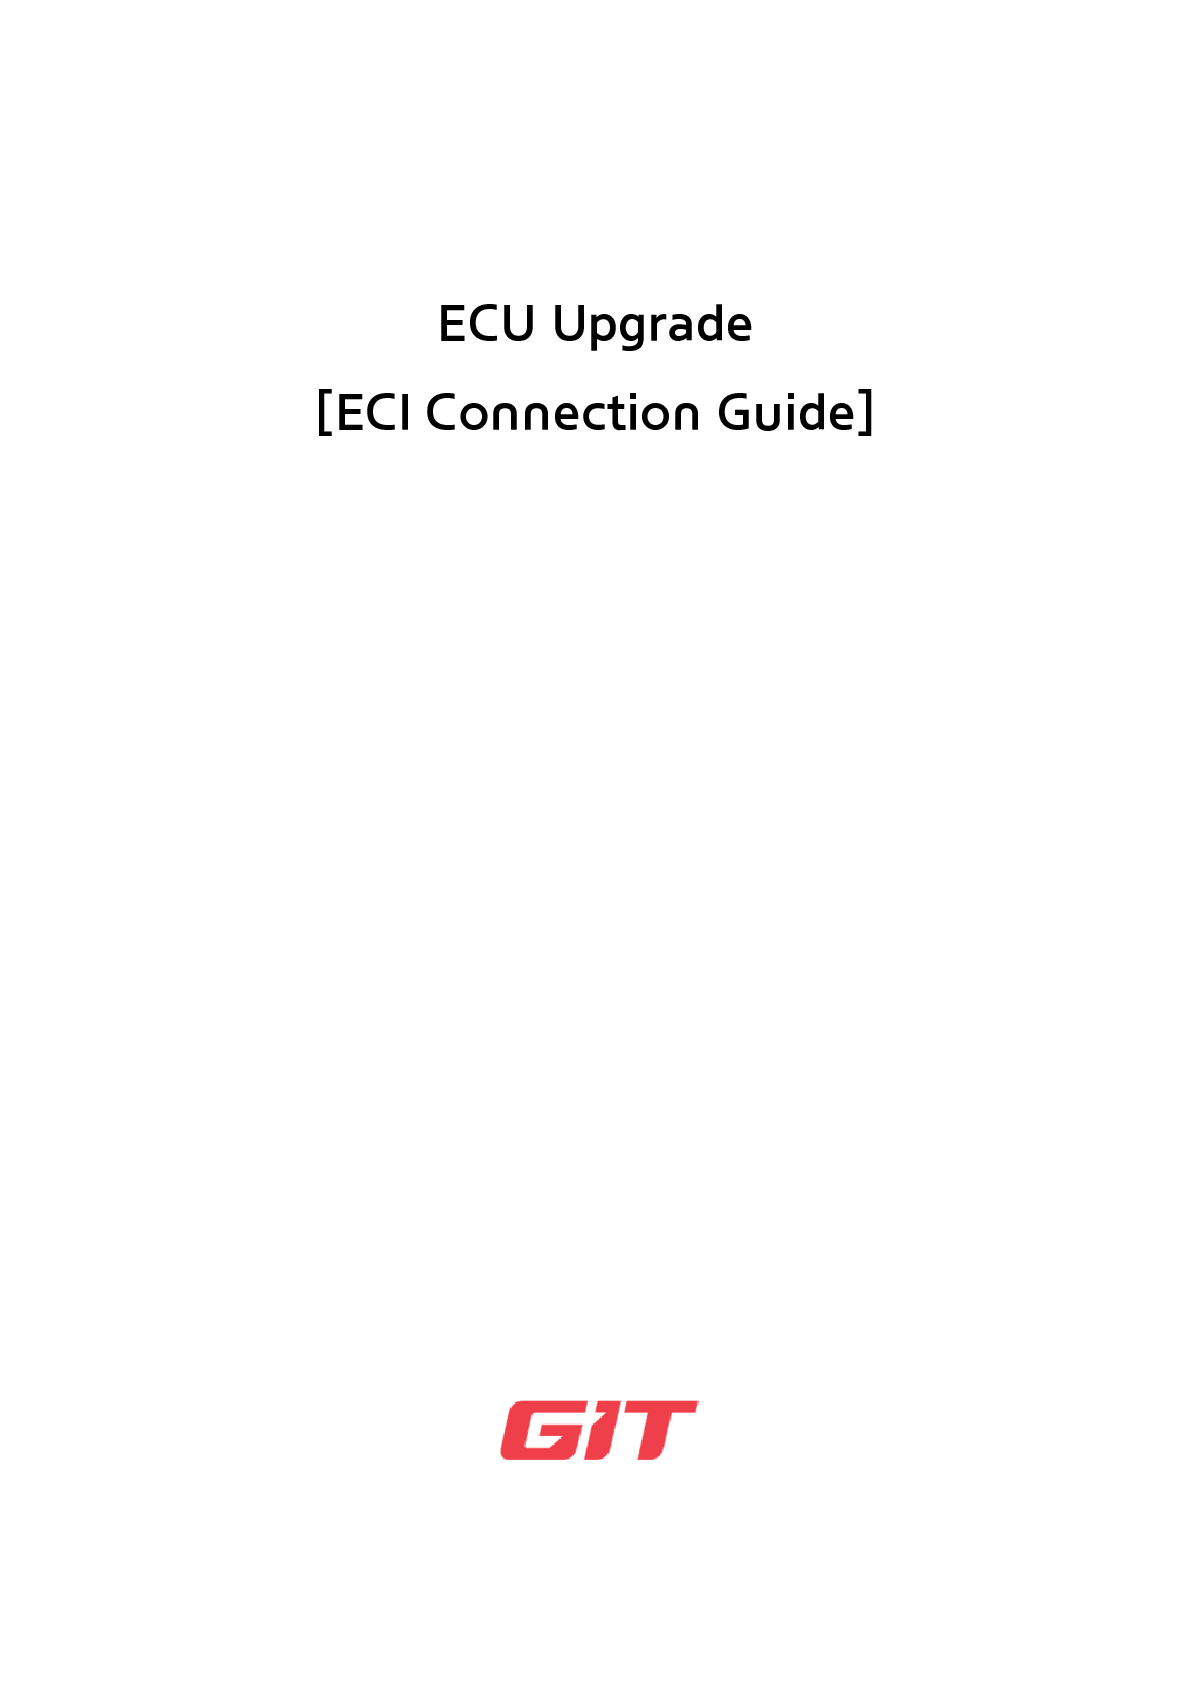 ECU UPGRADE - ECI CONNECTION GUIDE_20231201_1.png